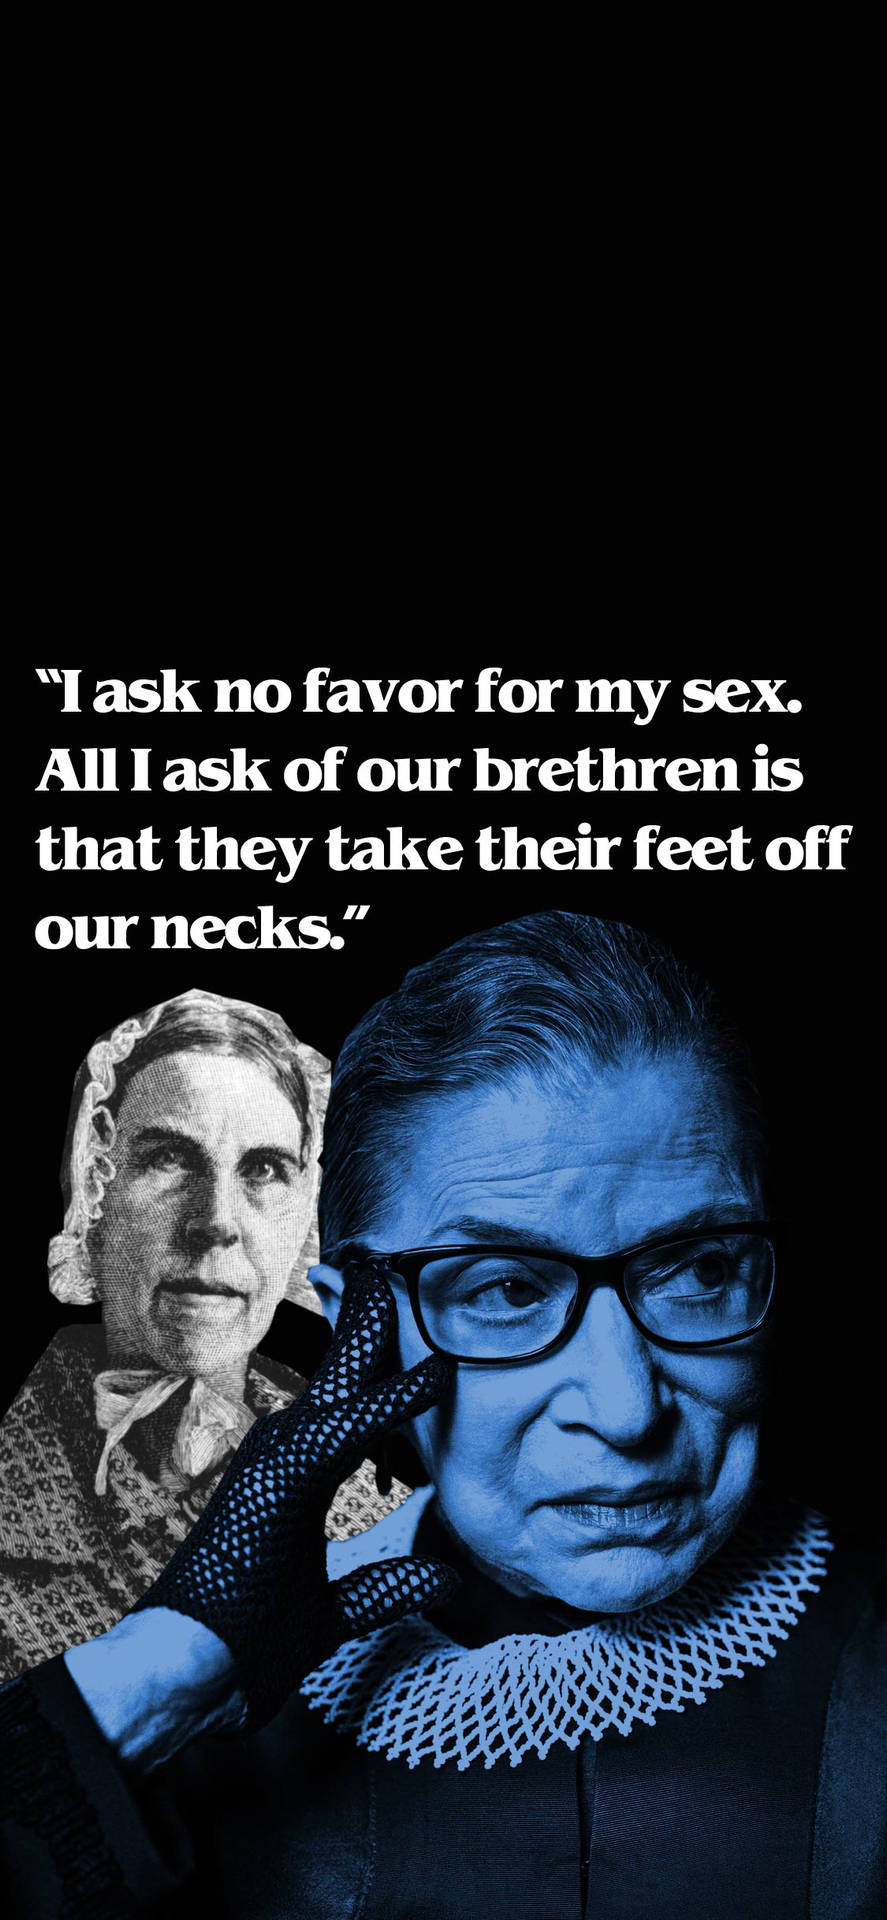 Ruth Bader Ginsburg Monochromatic Blue Poster